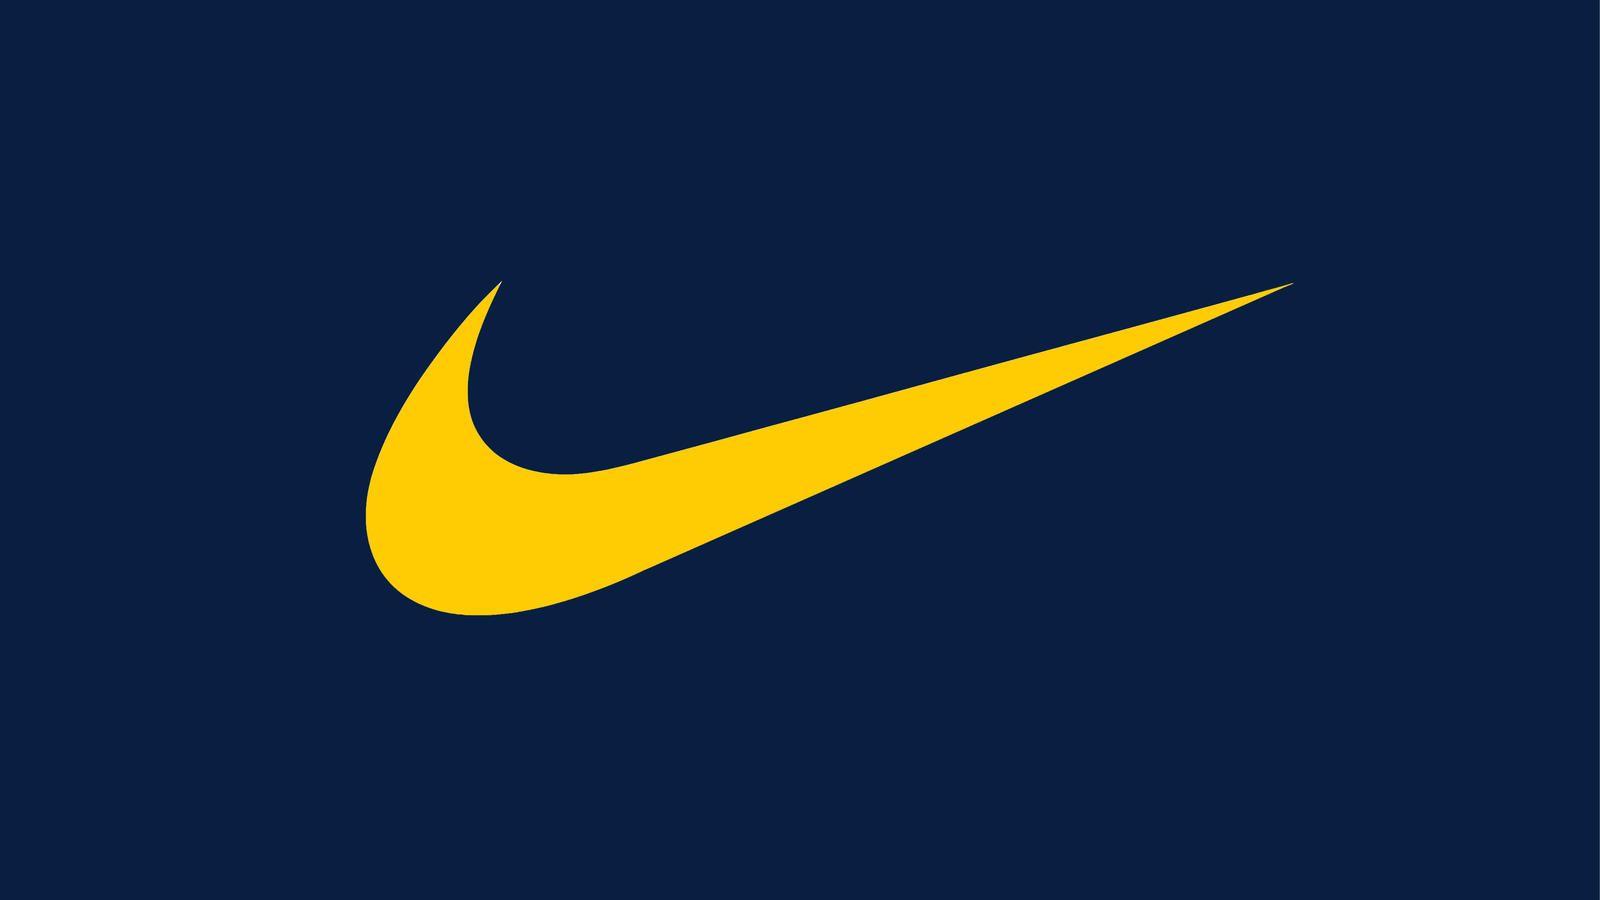 Yellow and Blue Nike Logo - List of Synonyms and Antonyms of the Word: nike logo blue